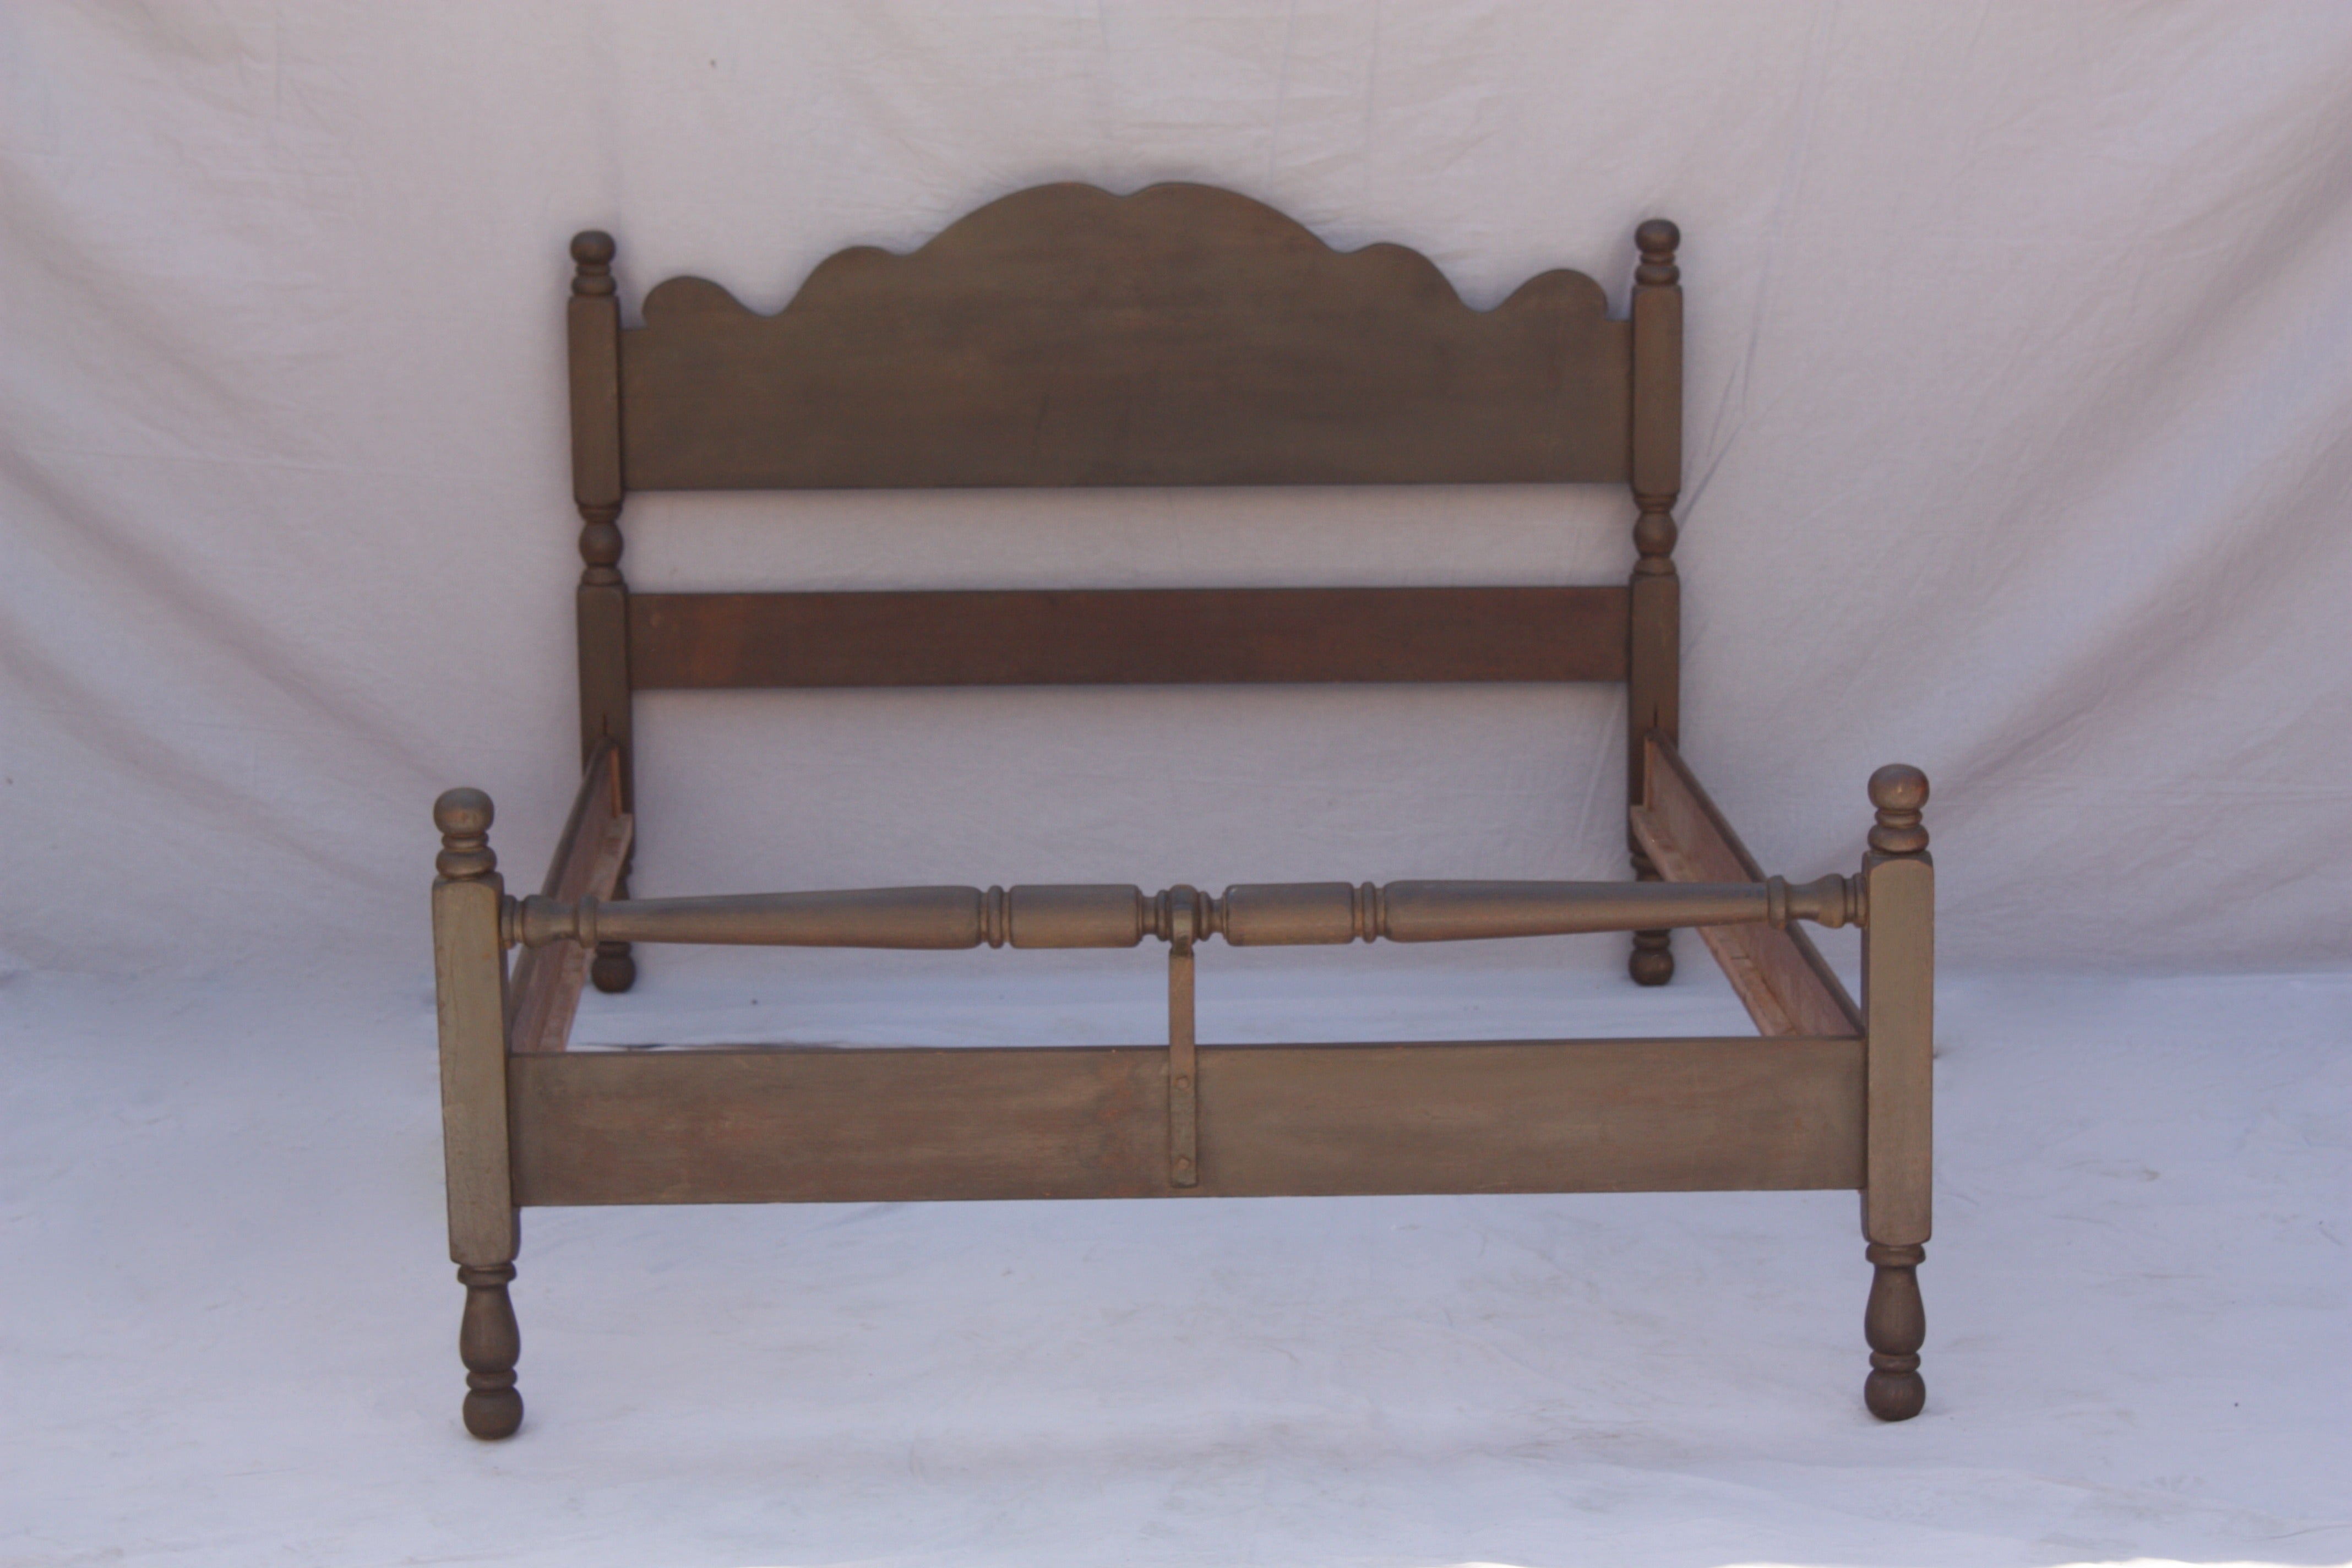 Signed Monterey Double Bed In Old Wood Finish